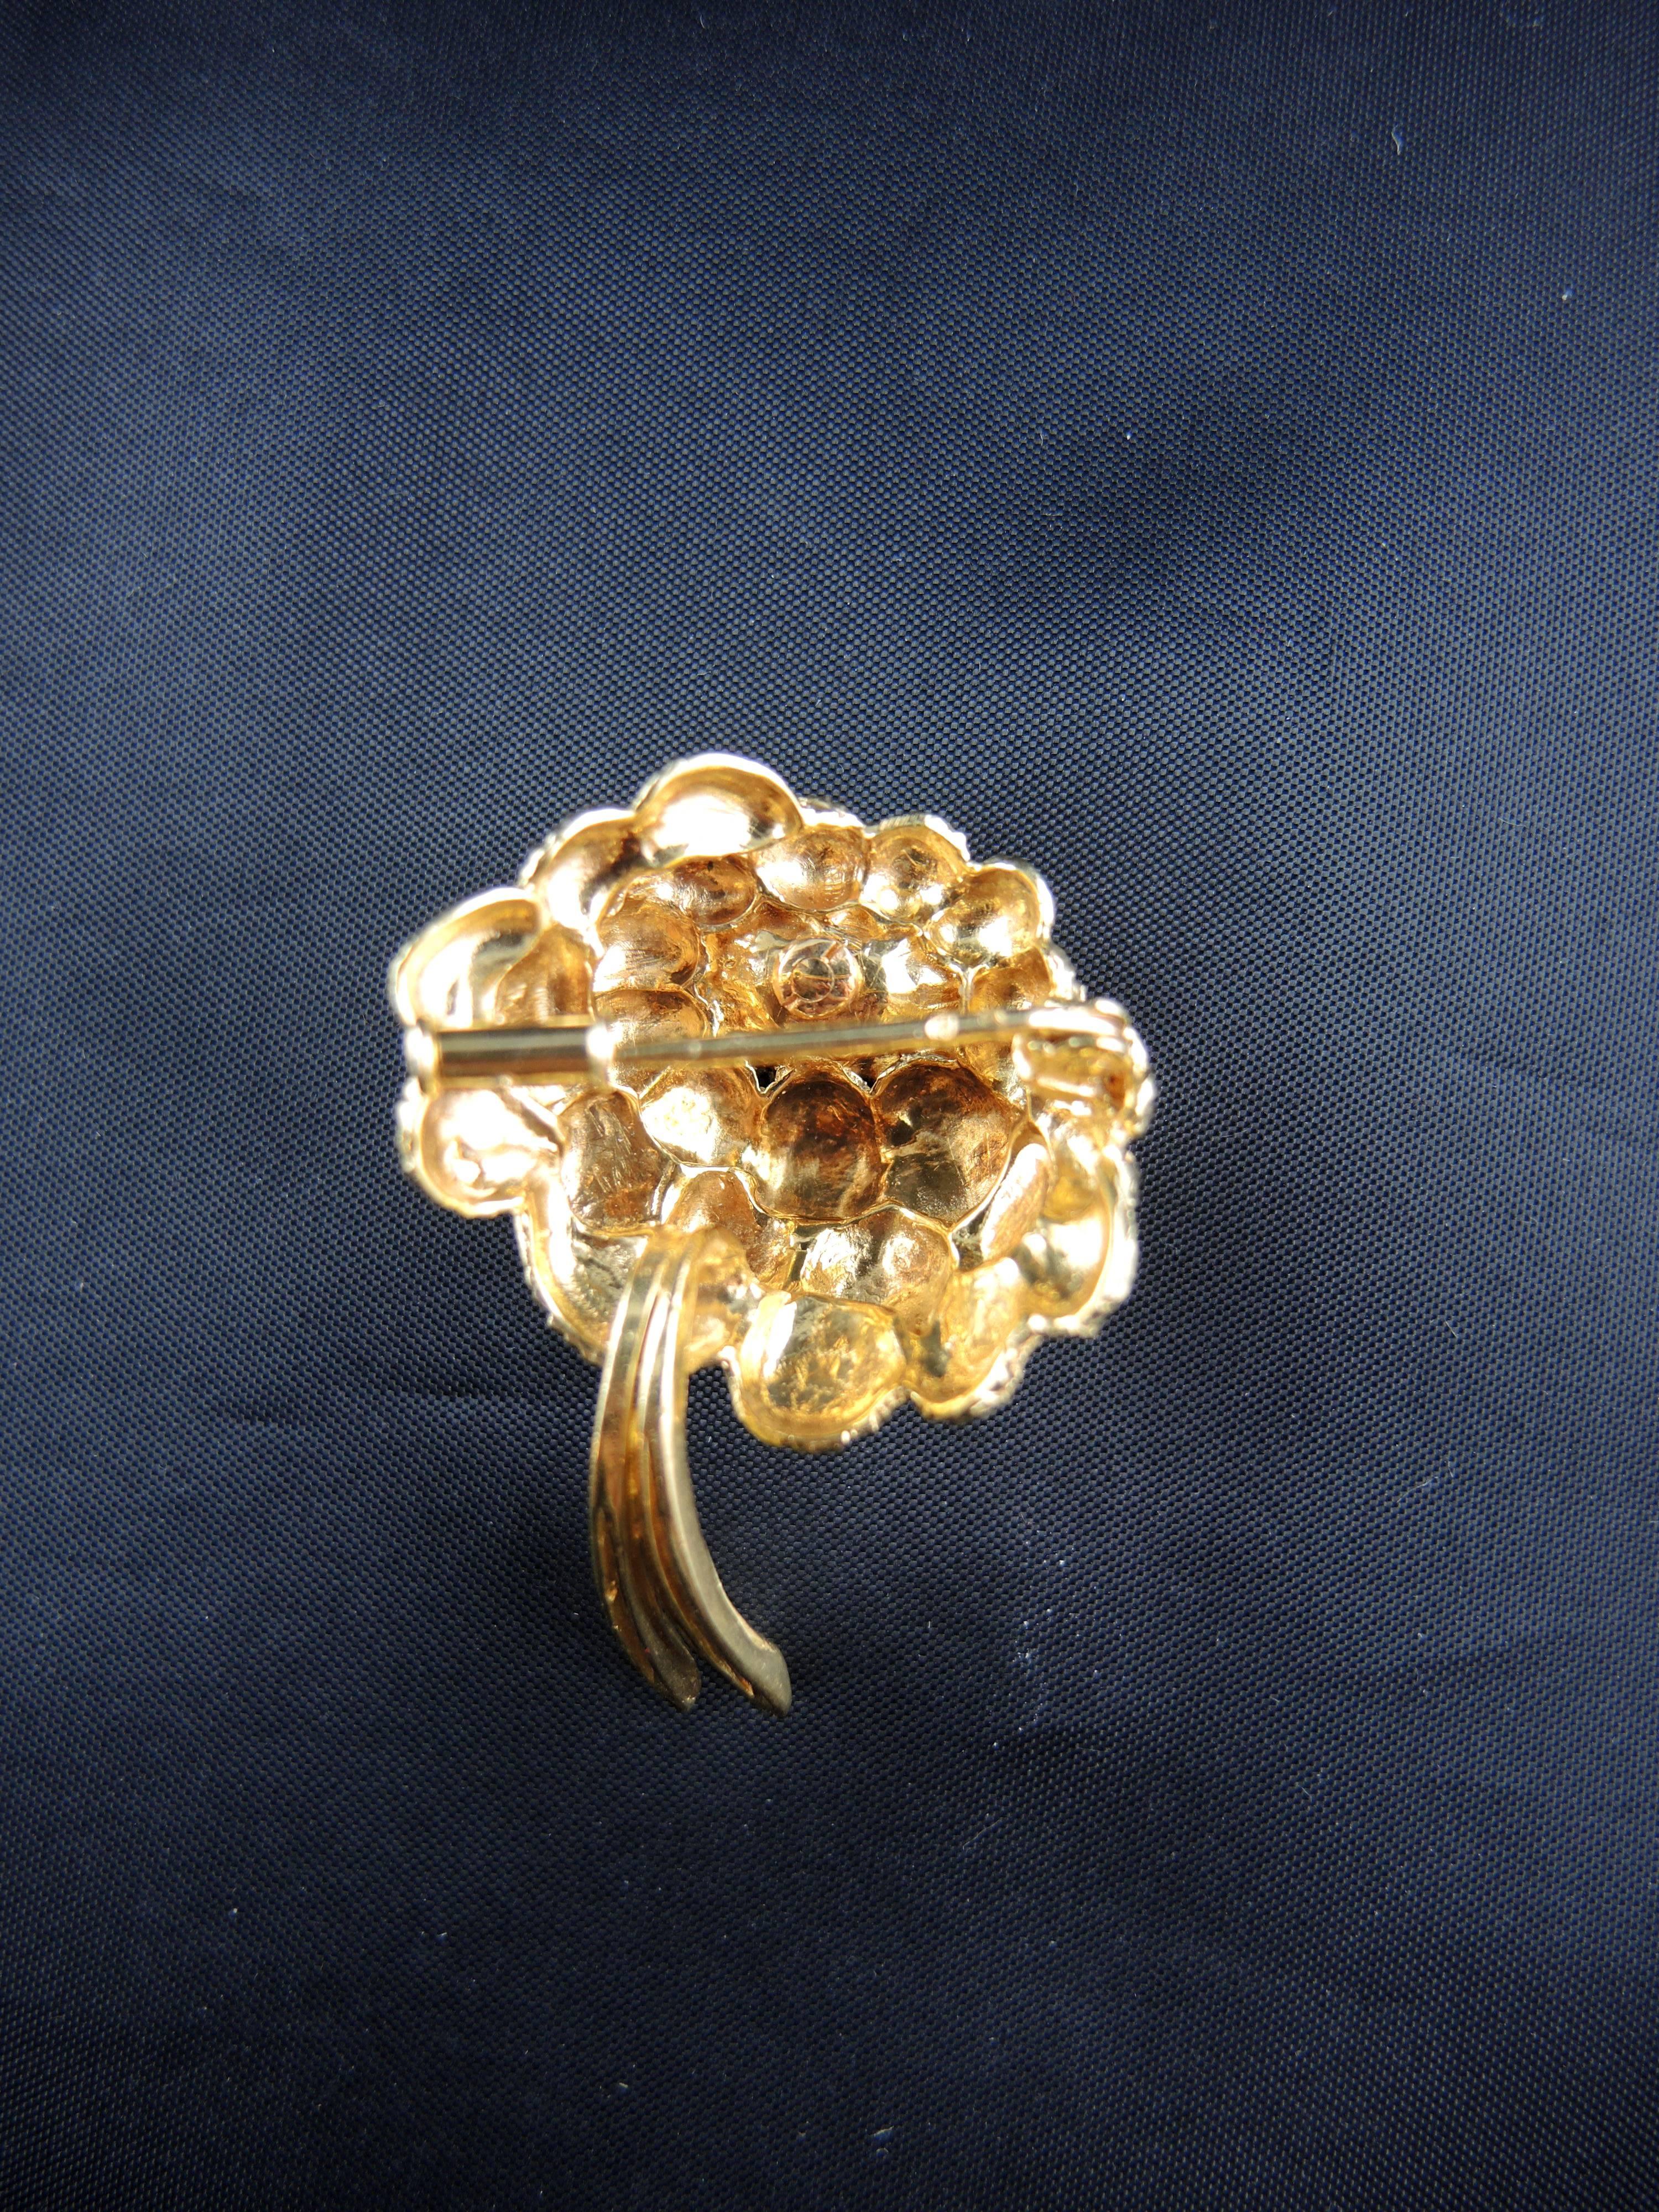 French Flower Gold Brooch by Michèle Morgan, French Actress, circa 1970 For Sale 1